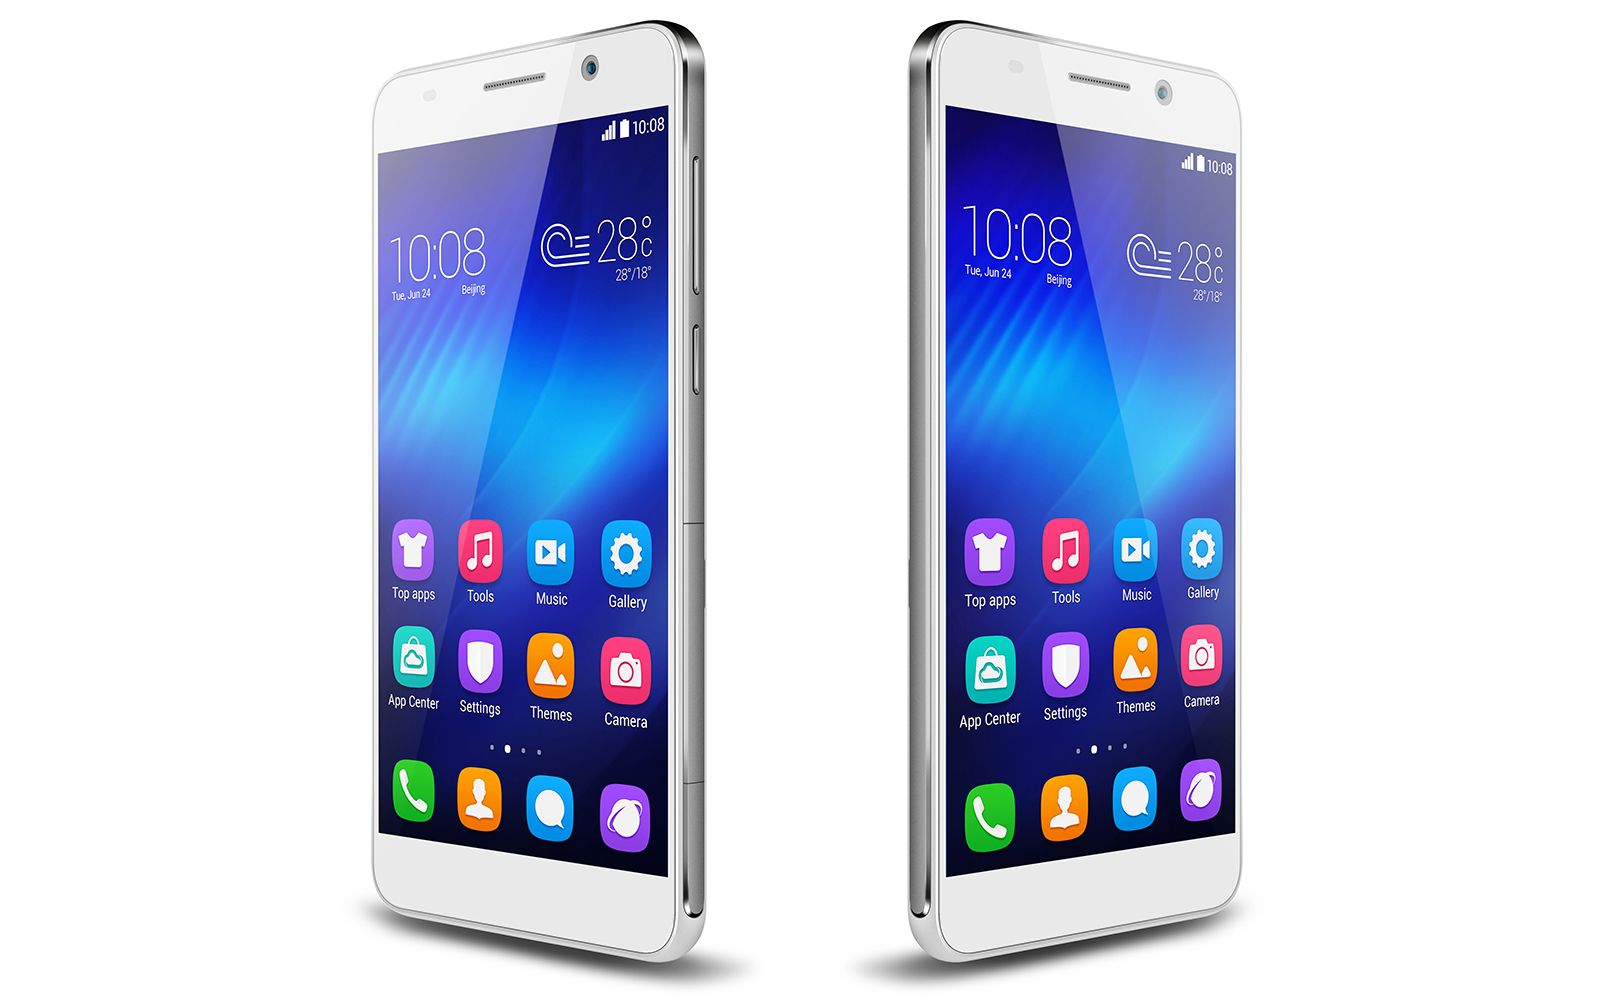 huawei launches honor brand with honor 6 smartphone featuring 300mbps lte image 1